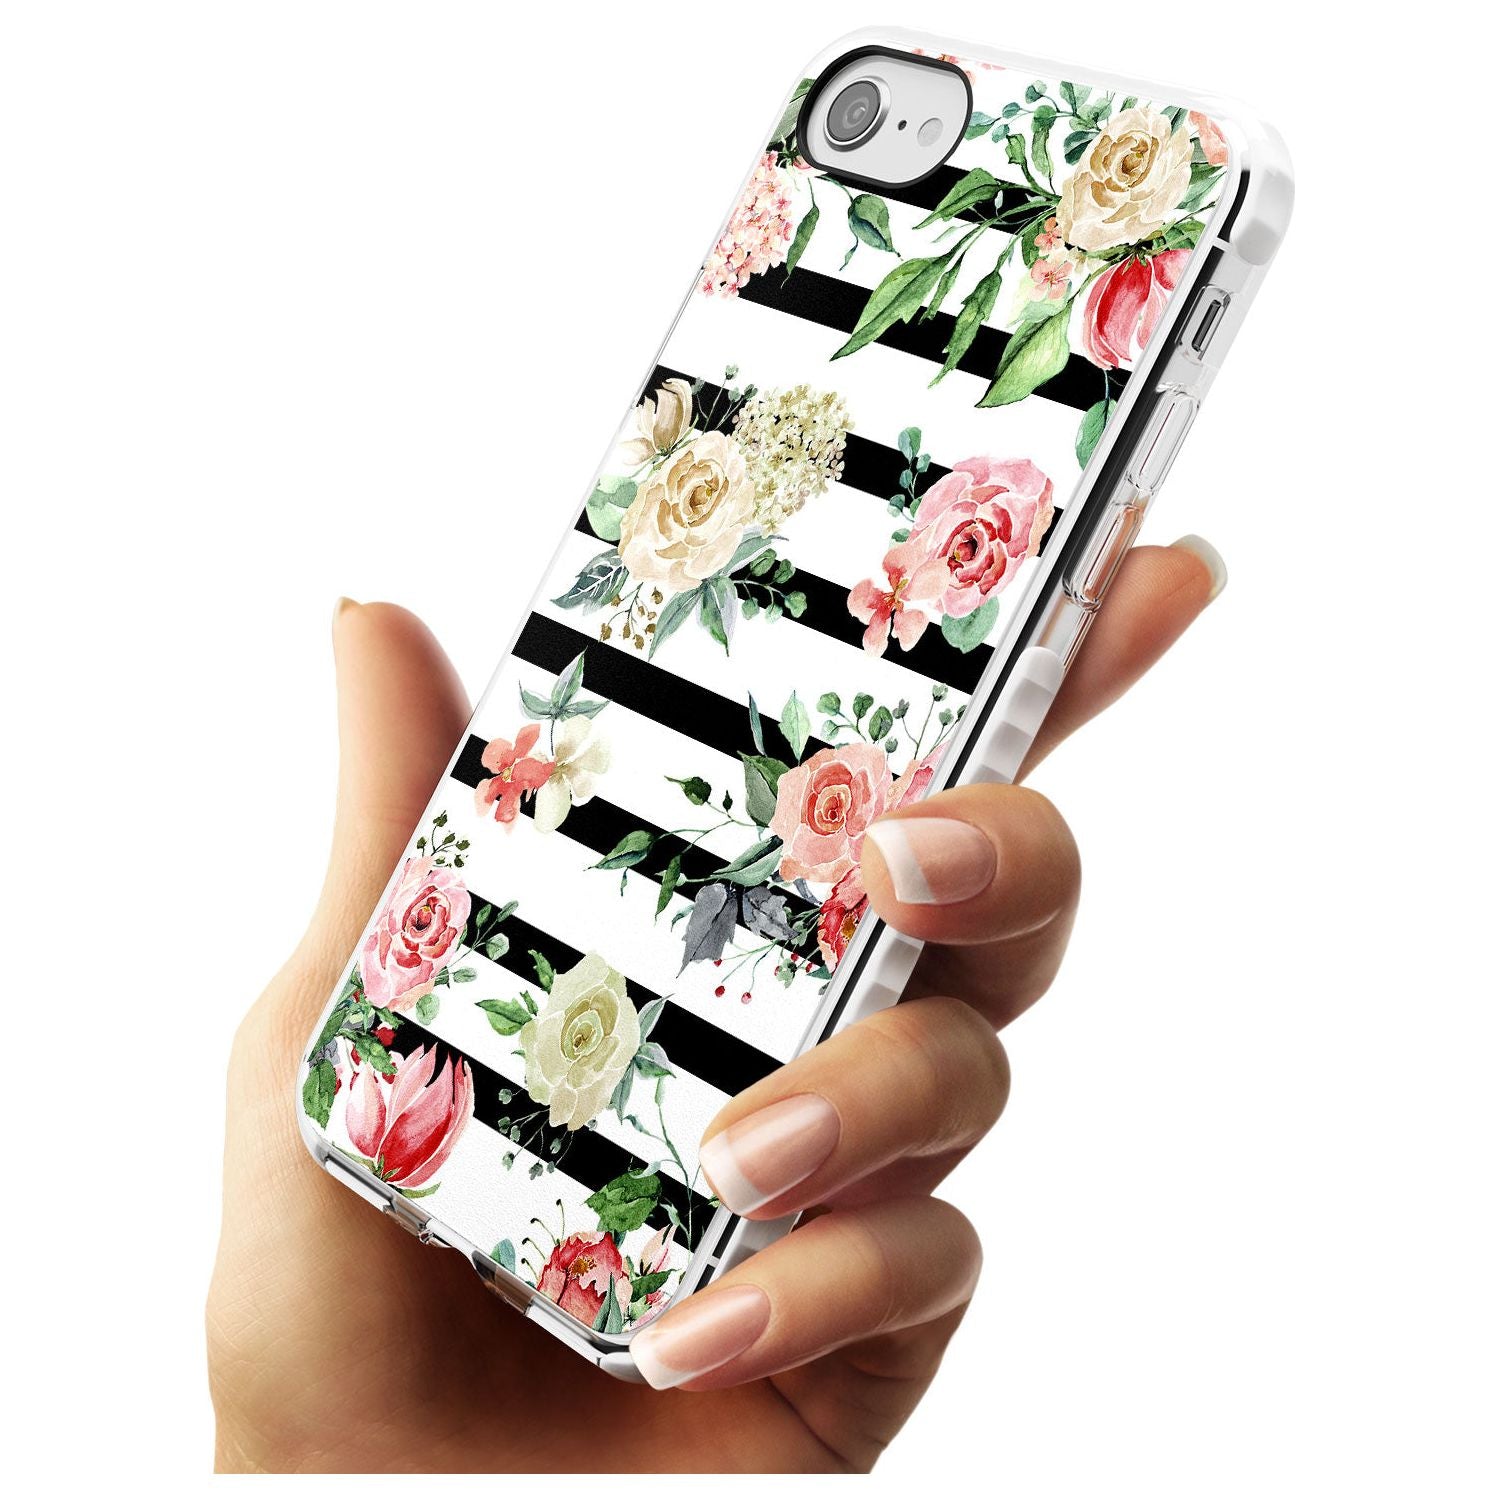 Bold Stripes & Flower Pattern Impact Phone Case for iPhone SE 8 7 Plus